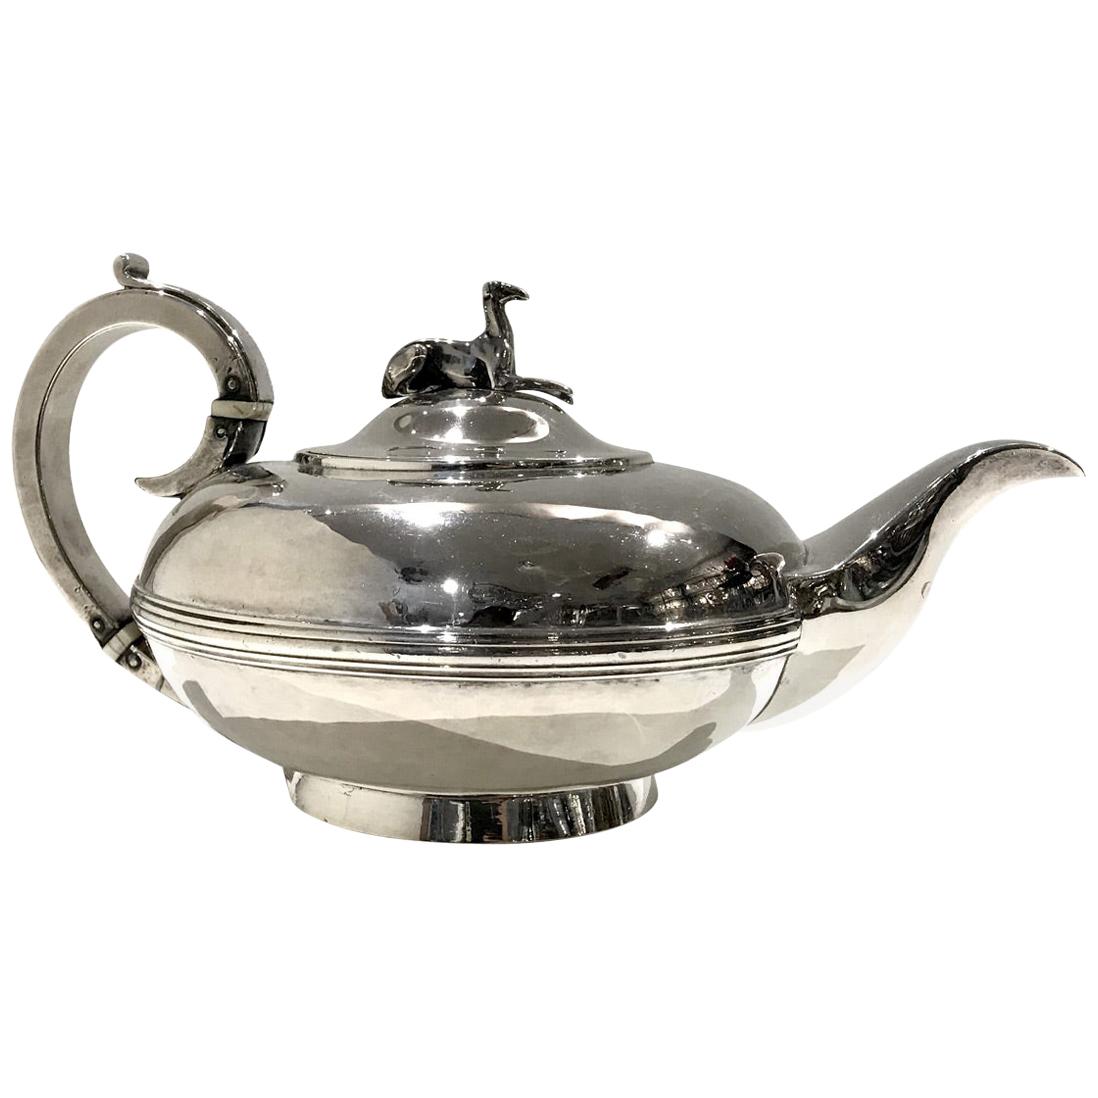 Greyhound English Teapot Sterling Silver Made in 1834